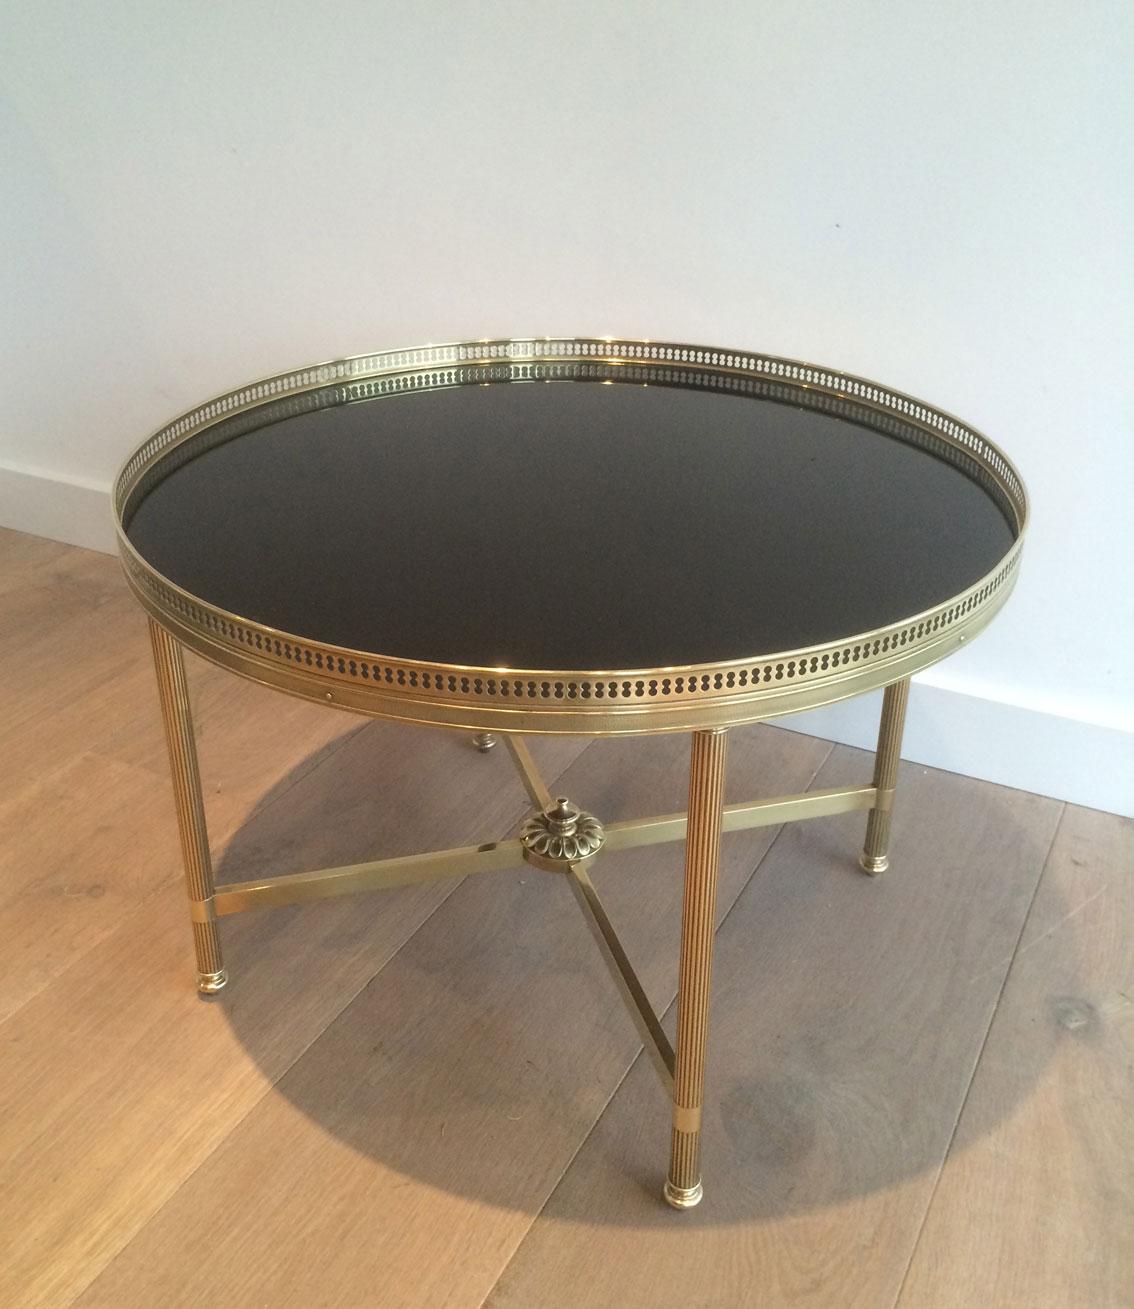 Mid-20th Century Maison Baguès, Neoclassical Style Round Brass Coffee Table with Black Lacquered